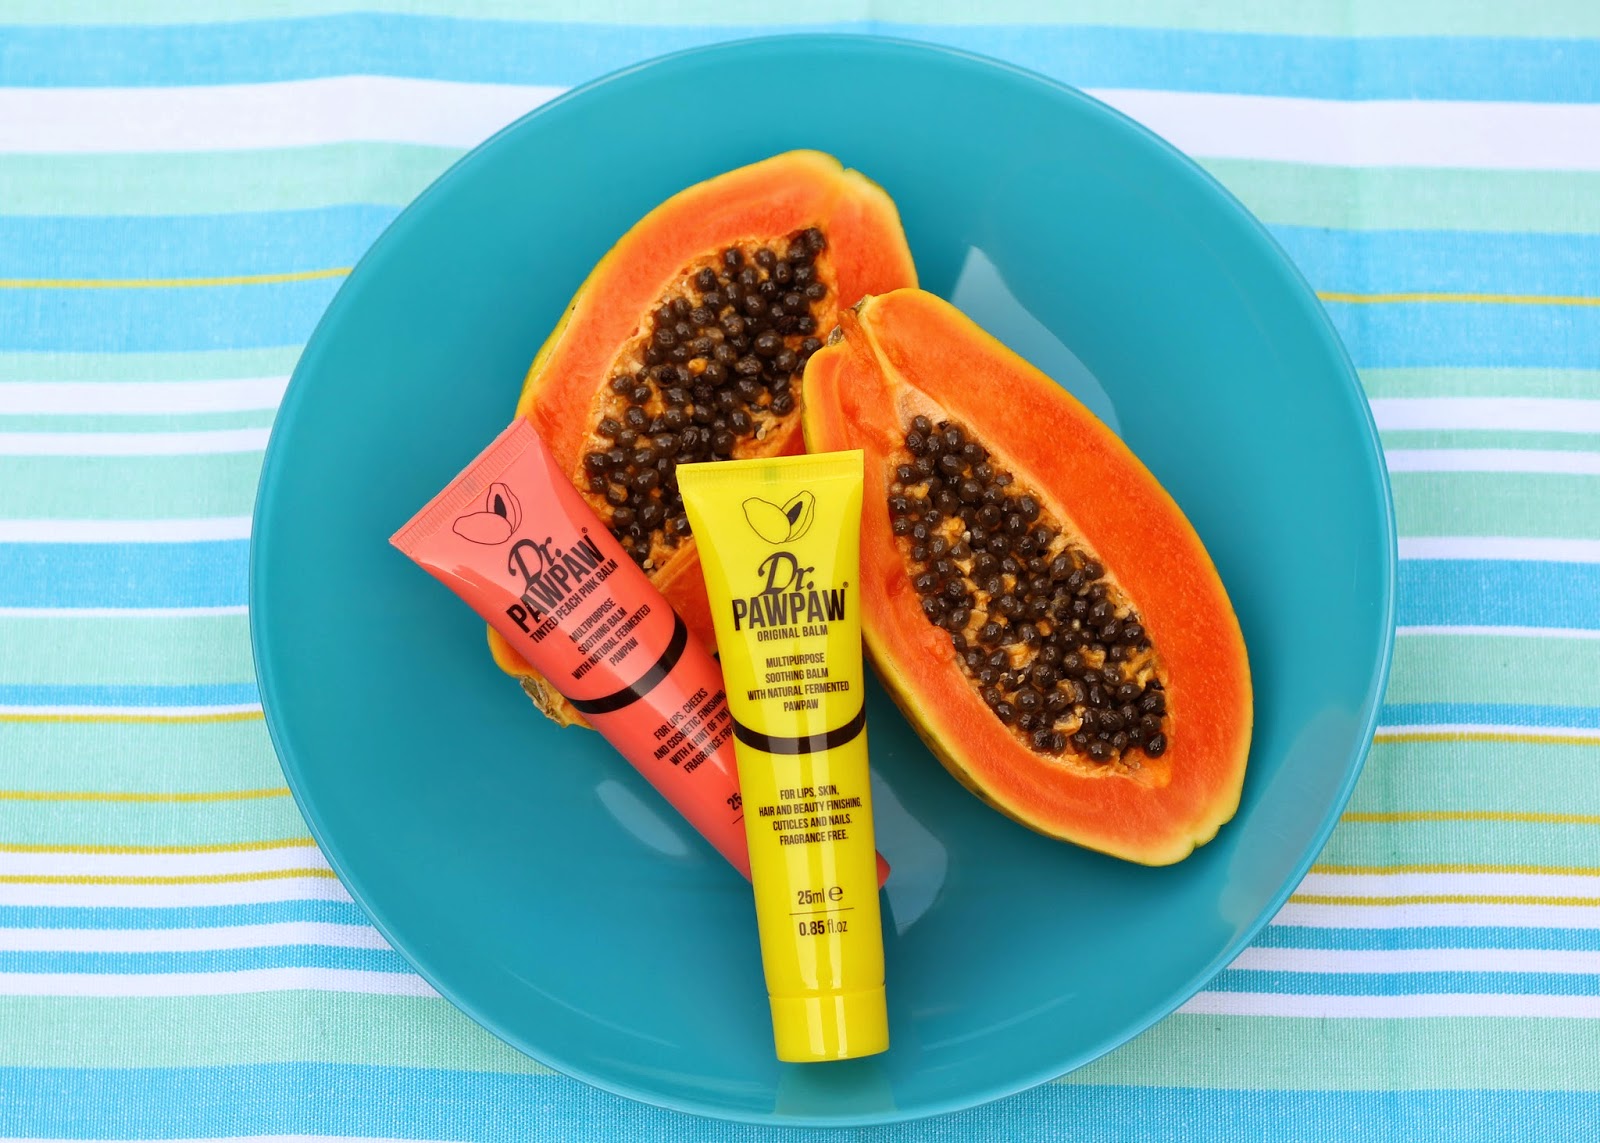 Dr PawPaw balm review